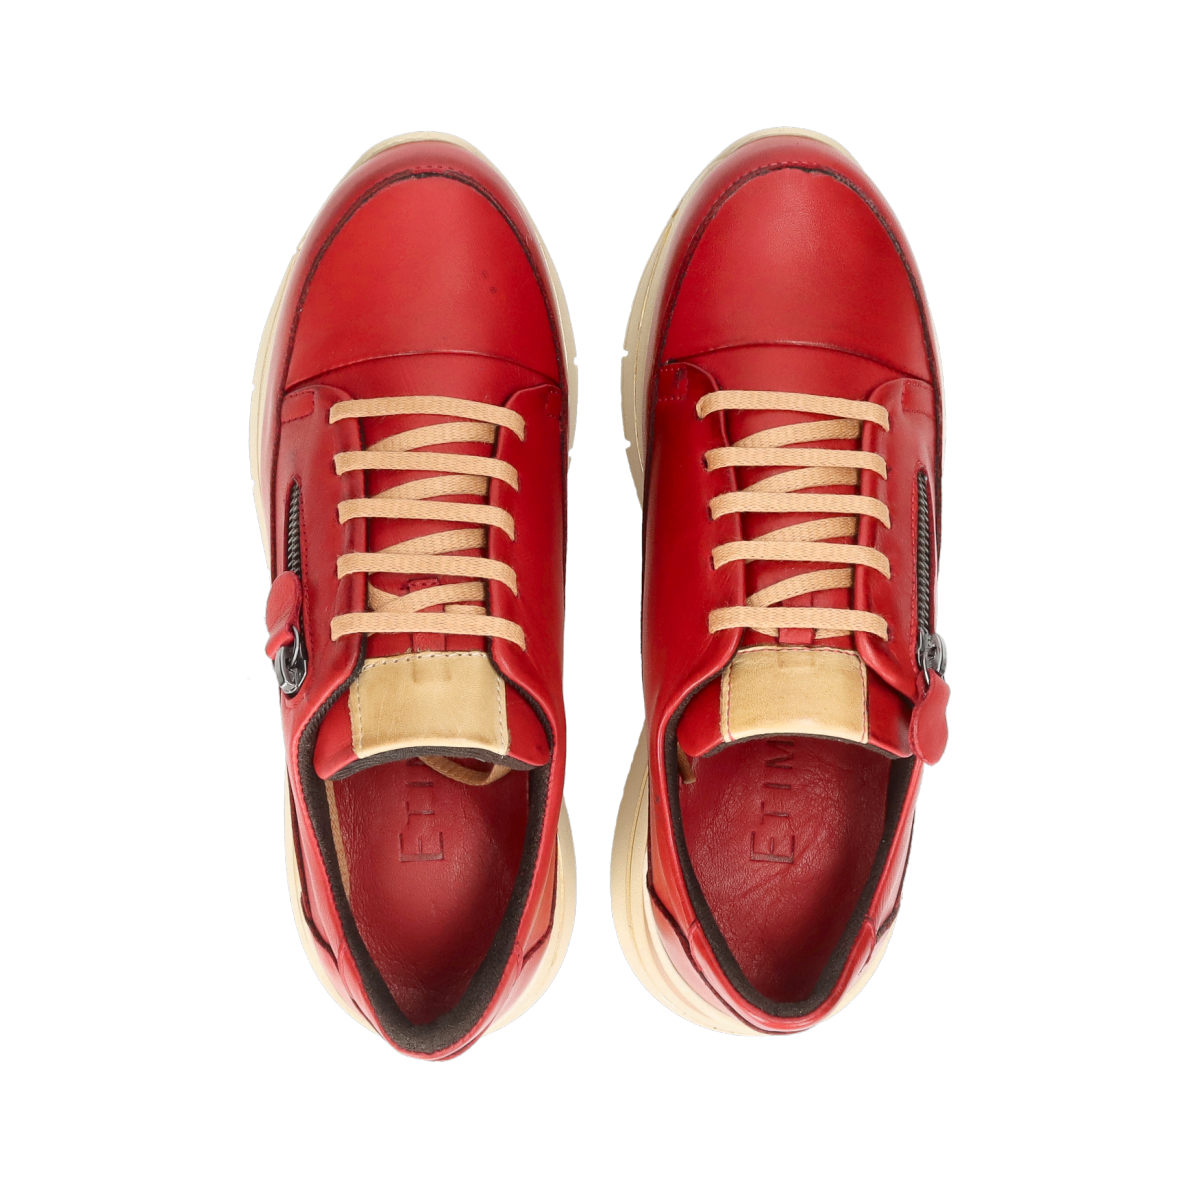 Sneakers | Maxim - Leather Sneakers In Heritage Red - Bally Mens - Dramponga